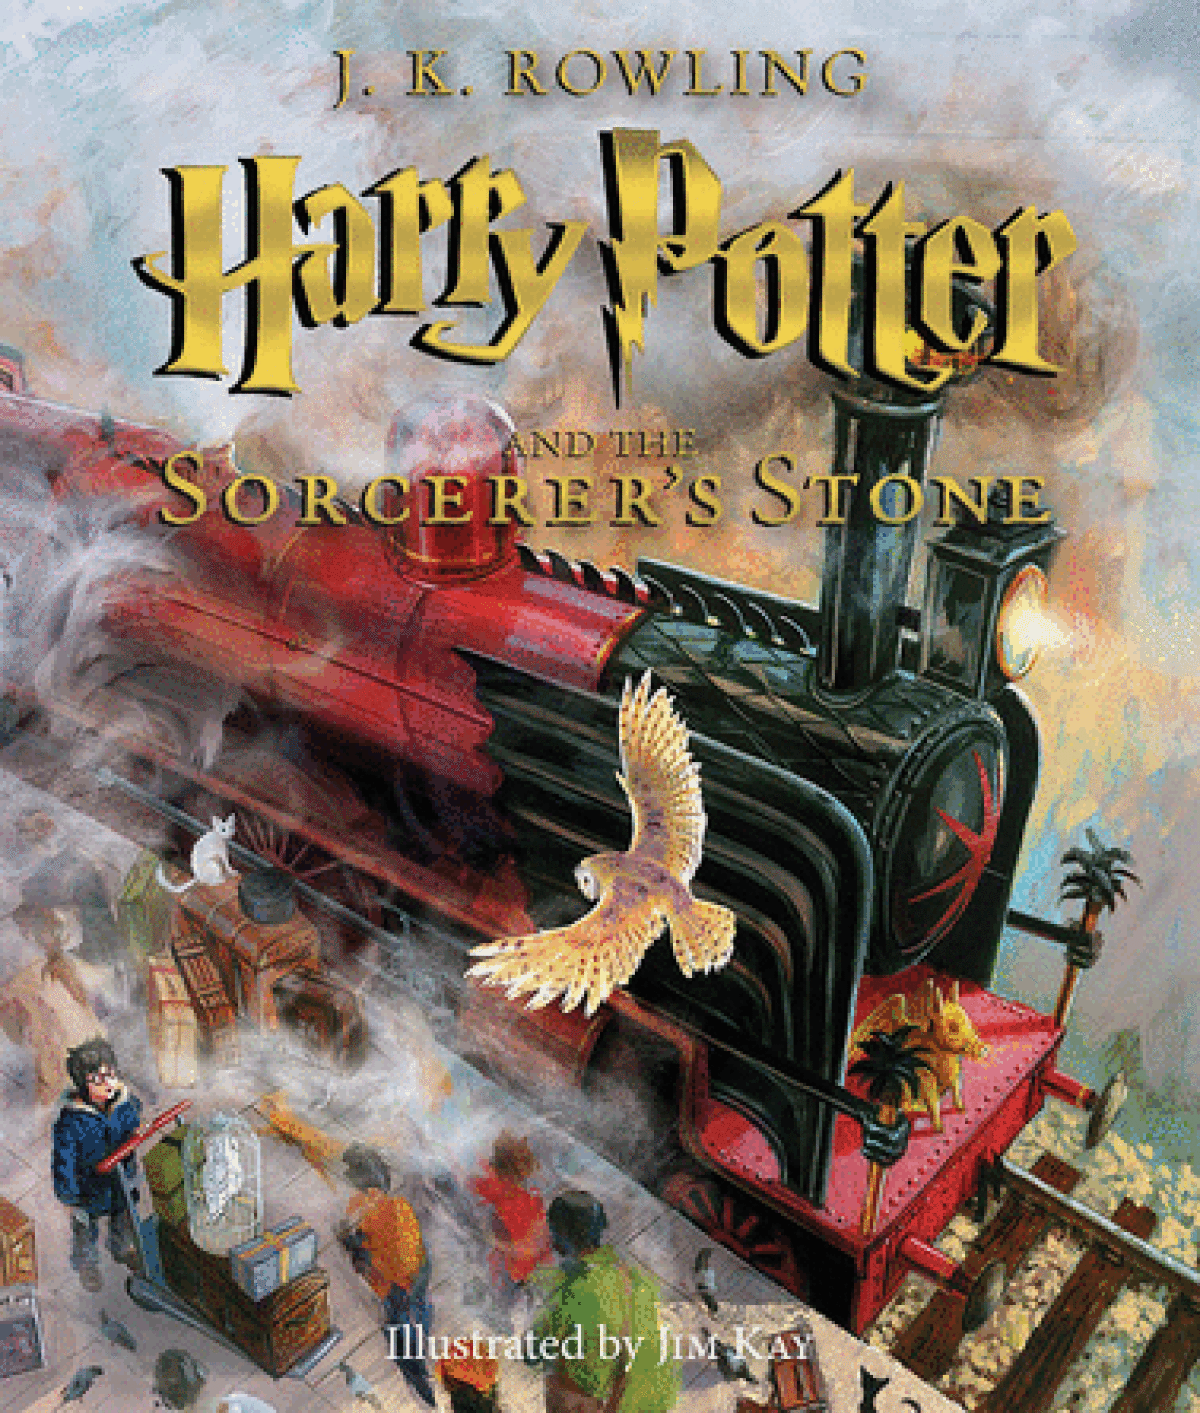 Harry Potter and the Sorcerer's Stone The Illustrated Edition J.K. Rowling, illustrated by Jim Kay